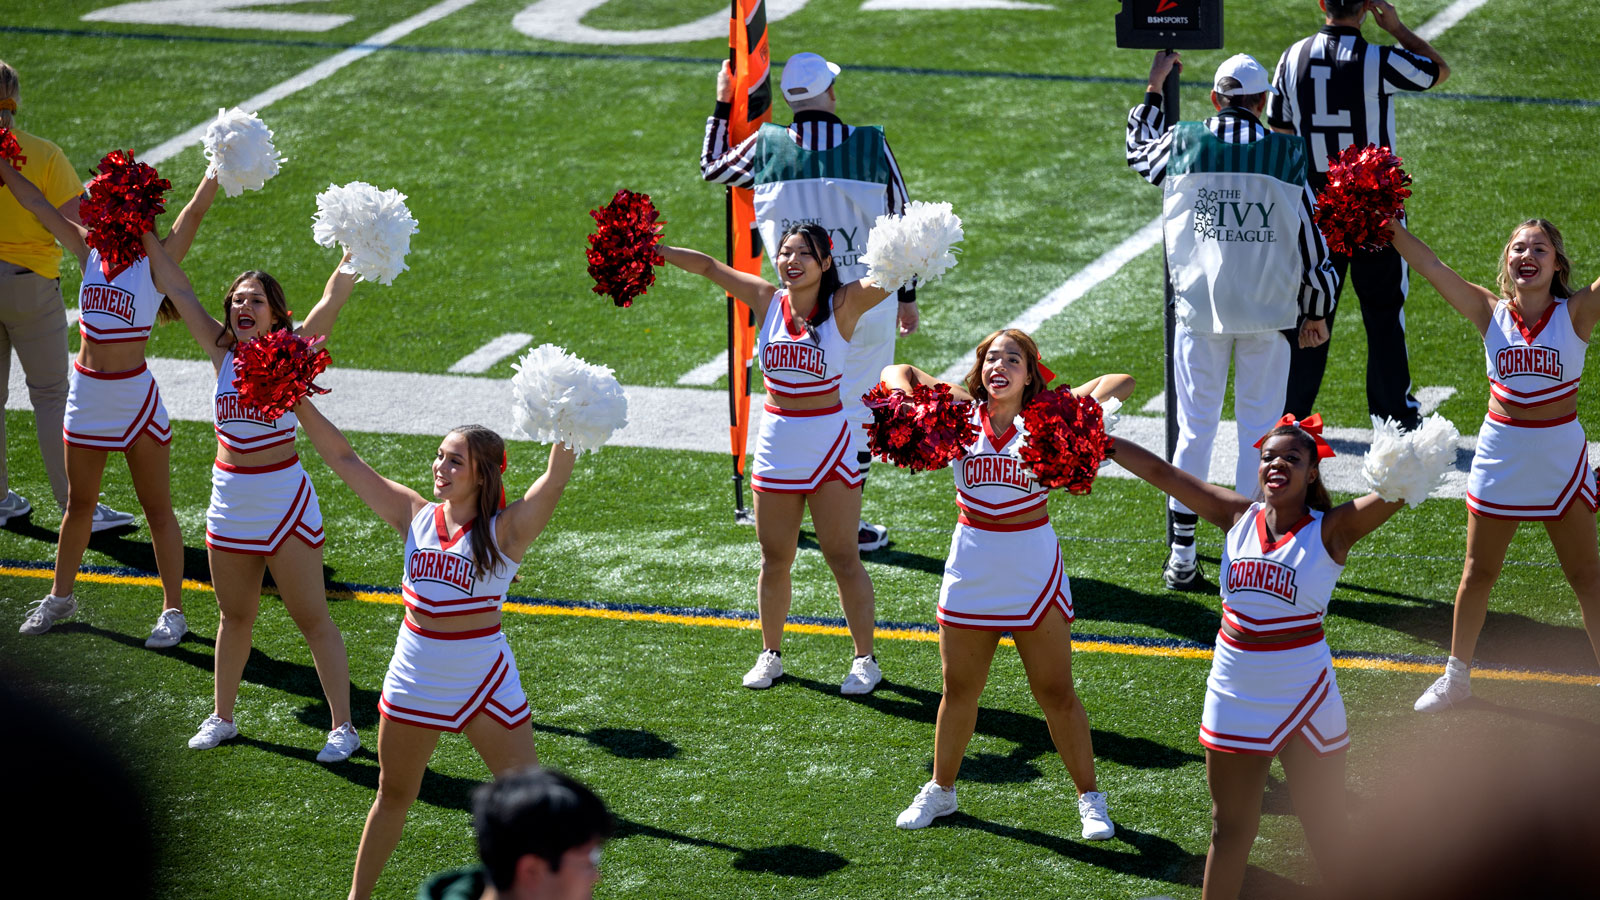 The Cornell Cheer team energizes the crowd at the Homecoming game at Schoellkopf